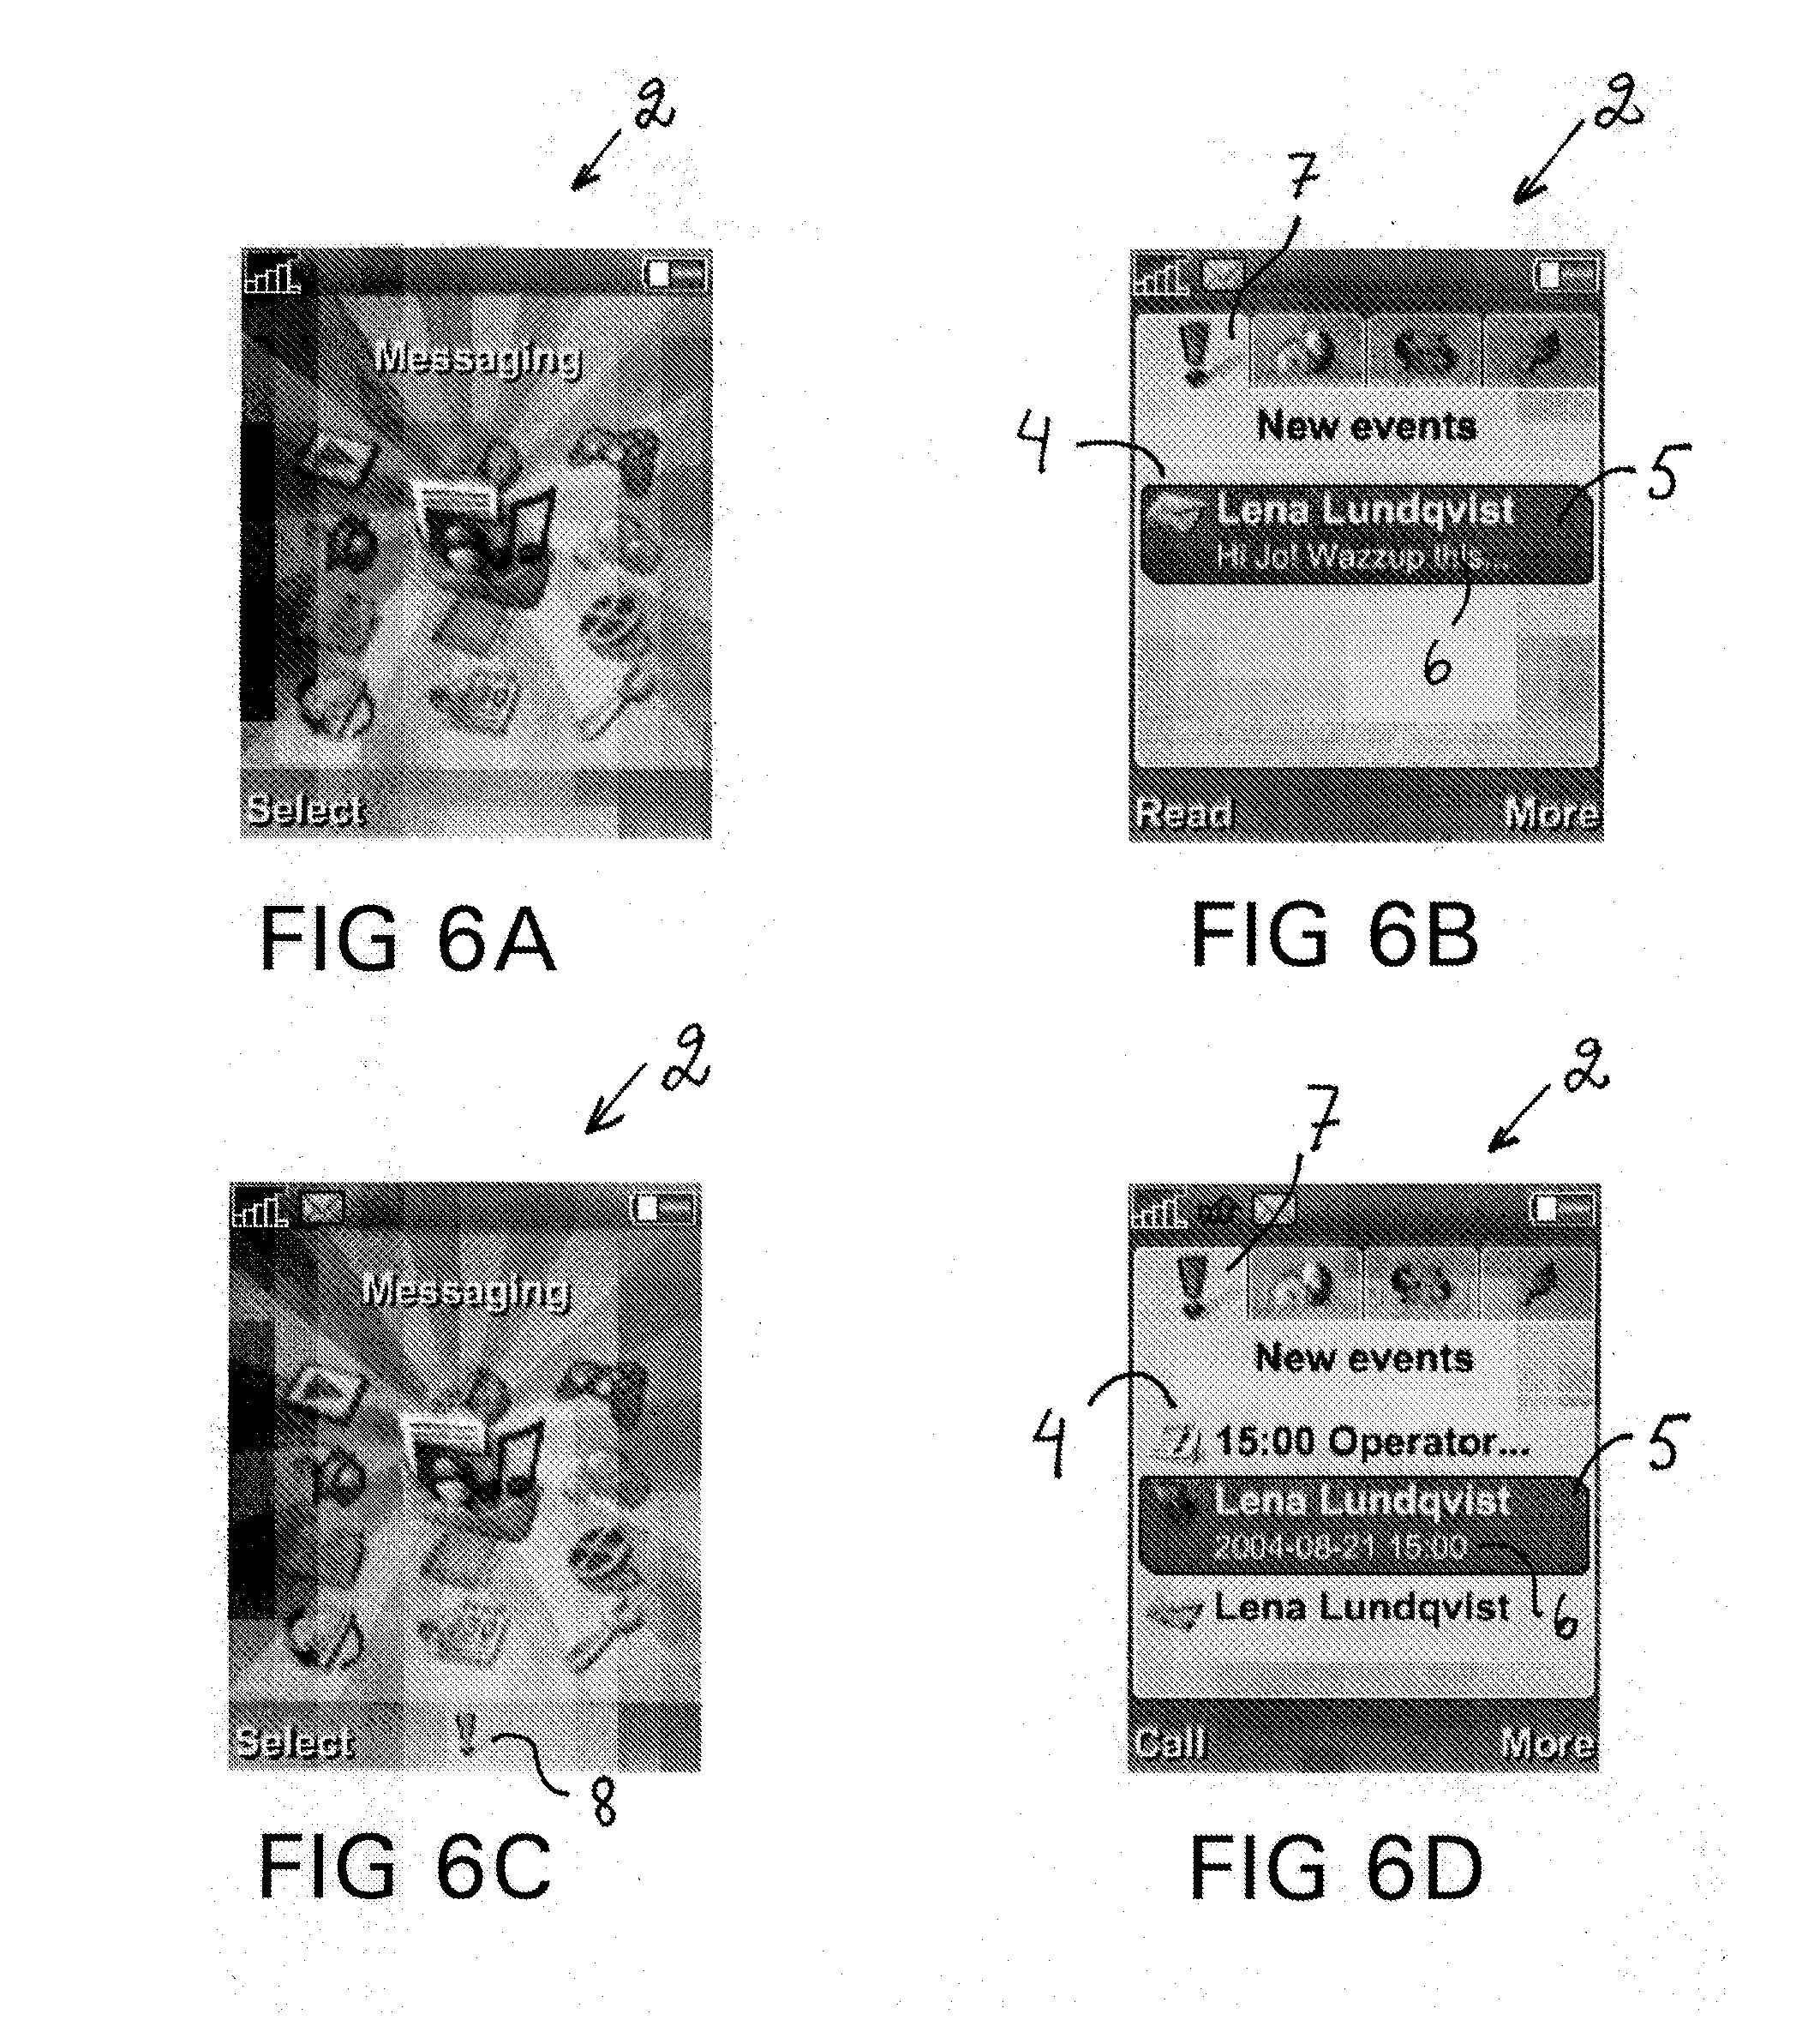 Method for Providing Alerts in a Mobile Device and Mobile Device Therefor